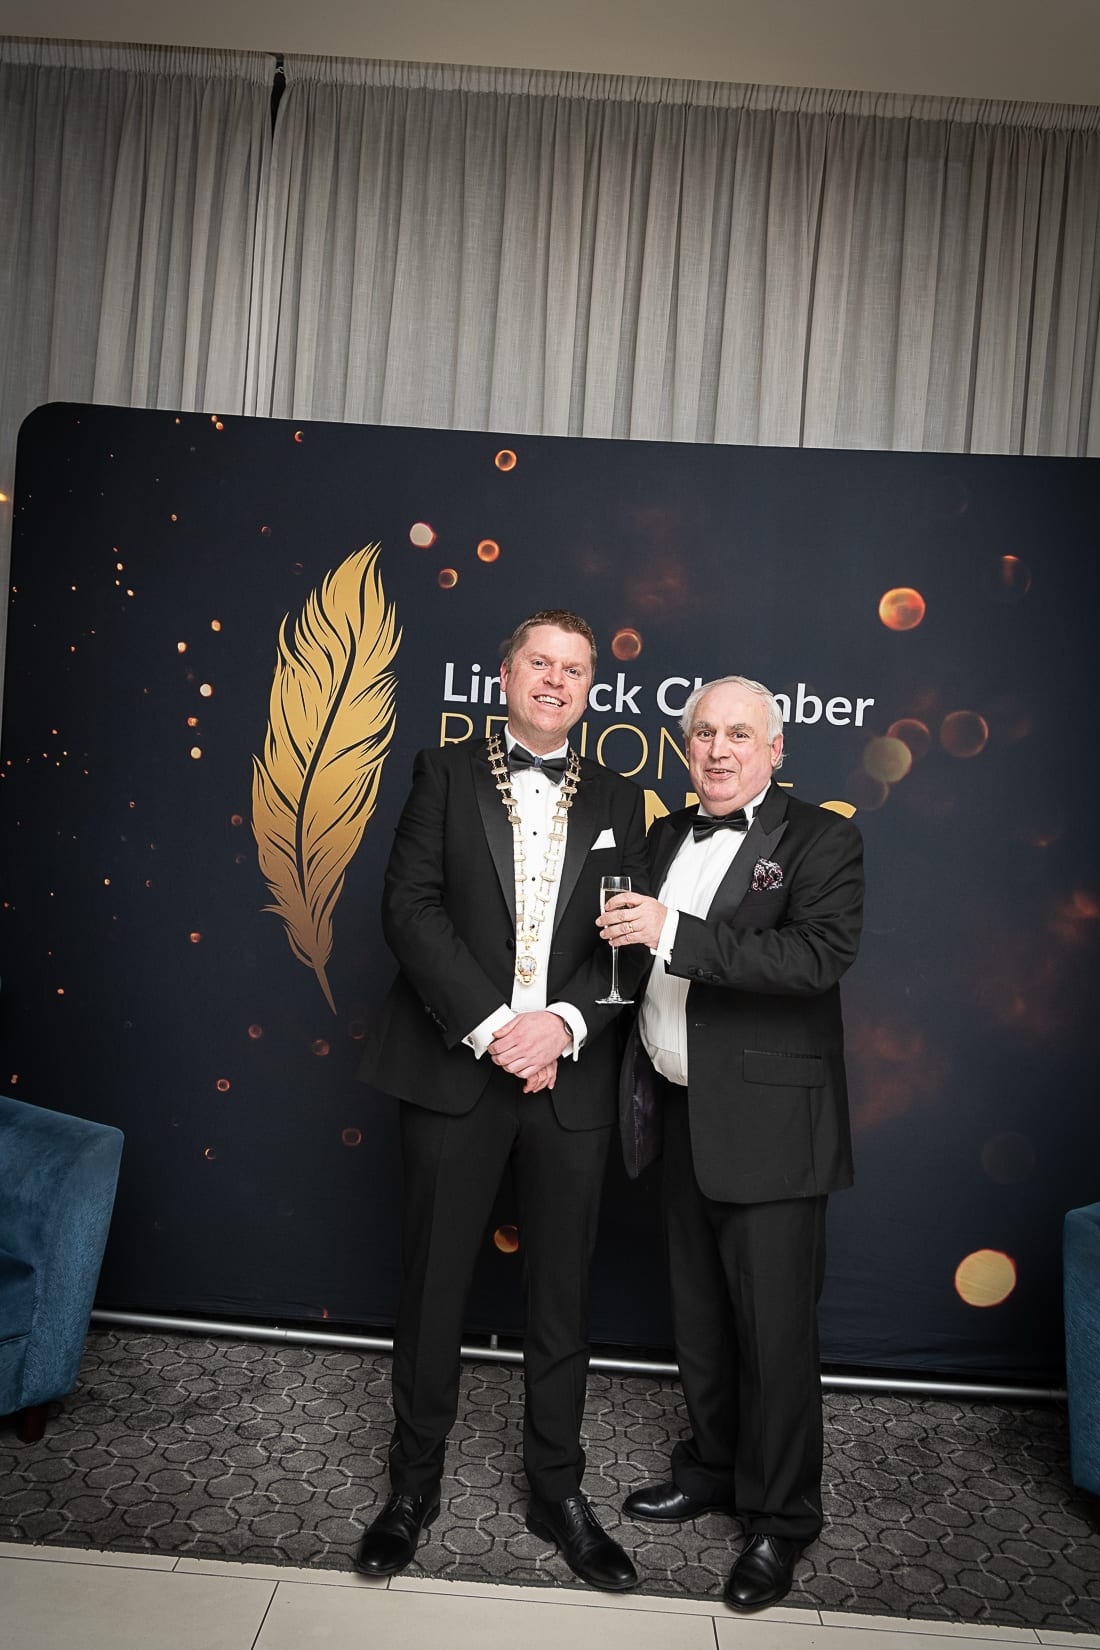 No repro fee-Limerick Chamber President’s Dinner
and Limerick Chamber Regional Business Awards 2019 which was held in the Strand Hotel on Friday 15th November - From Left to Right: Eoin Ryan - President Limerick Chamber, Paddy Mulvilhill. 
Photo credit Shauna Kennedy